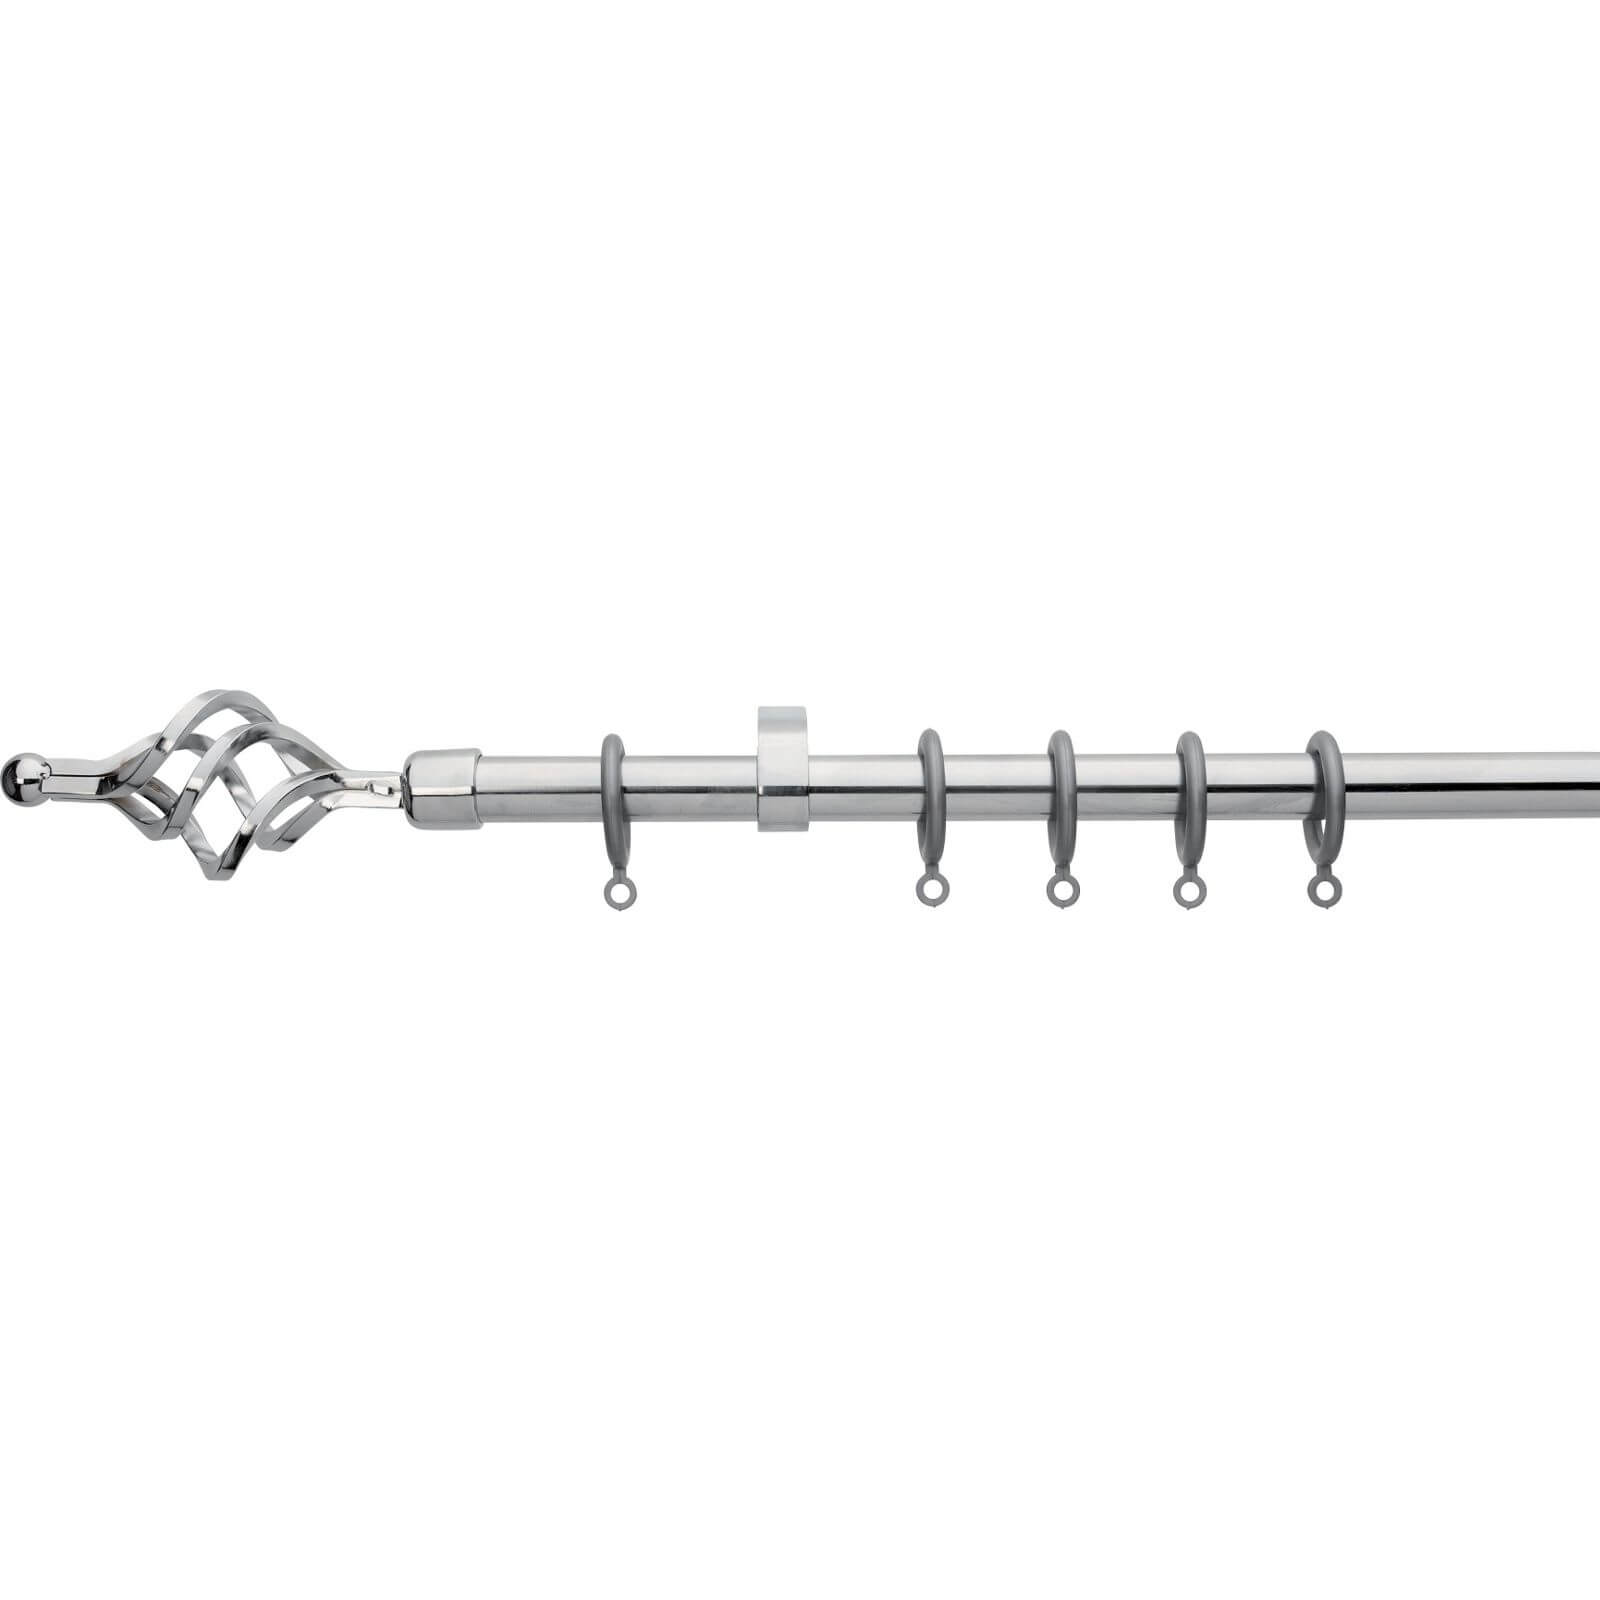 Chrome Extendable Curtain Pole with Cage Finial 1.2 - 2.1m